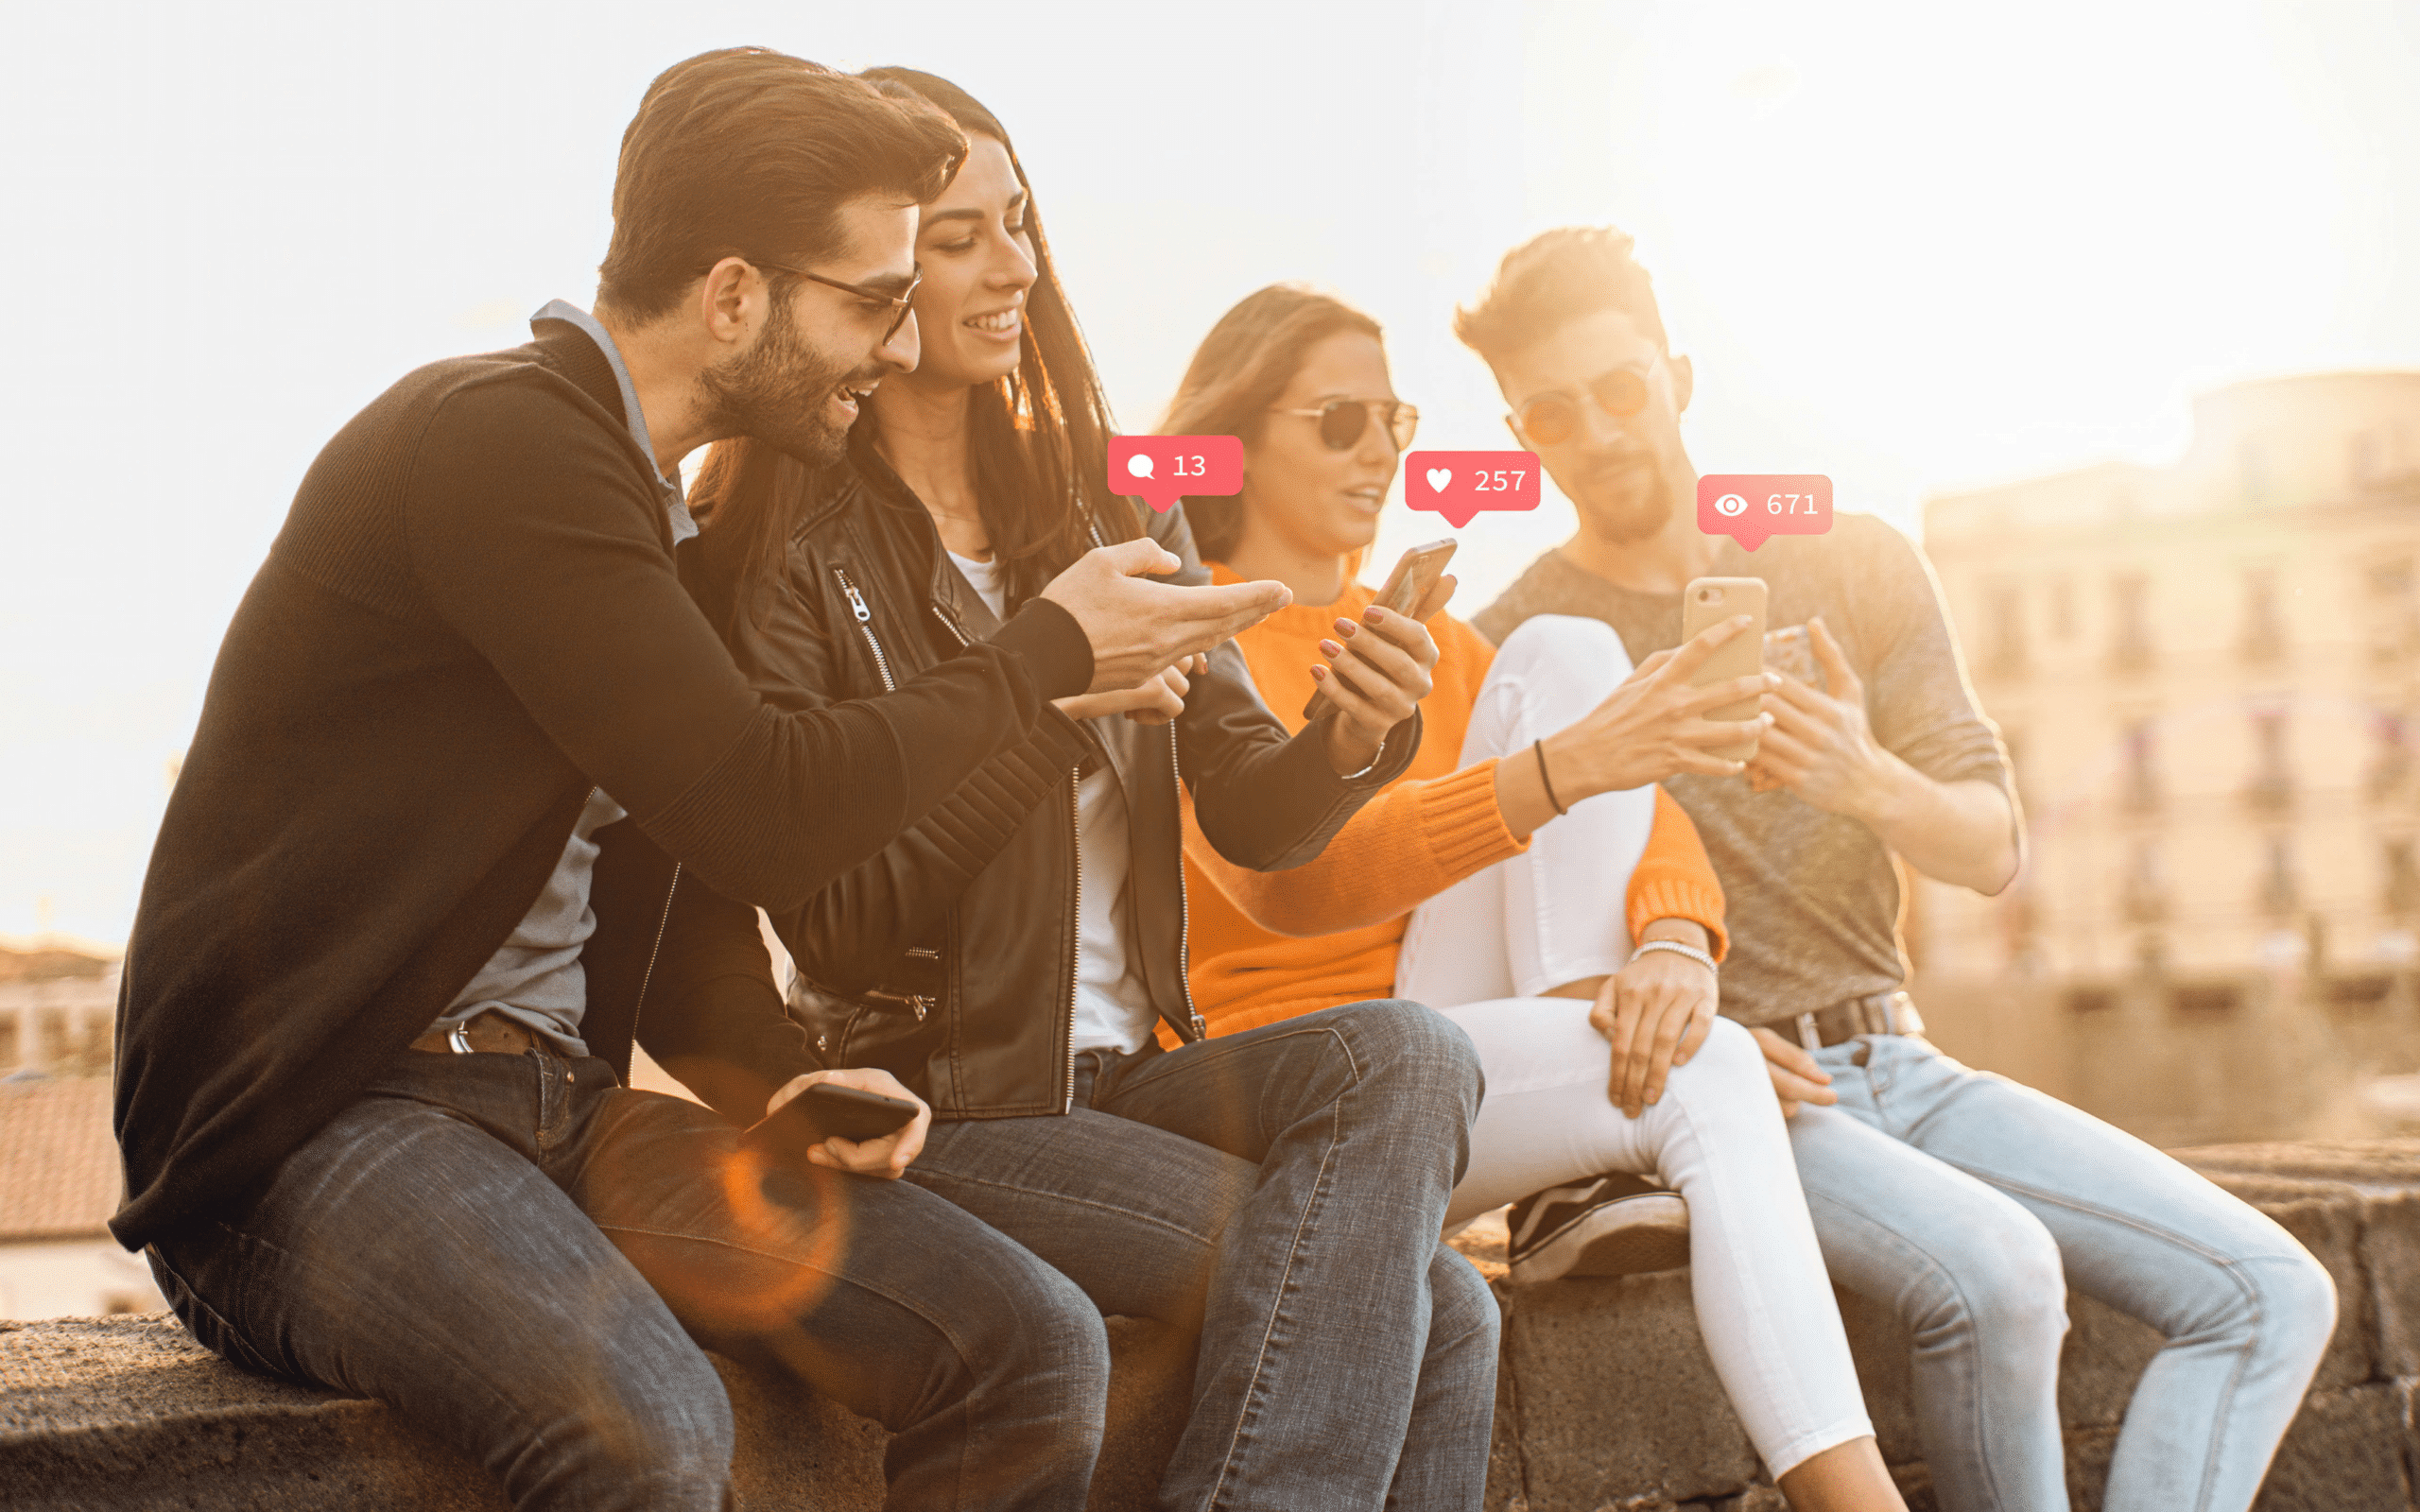 a group of friends looking at social media together on their phones